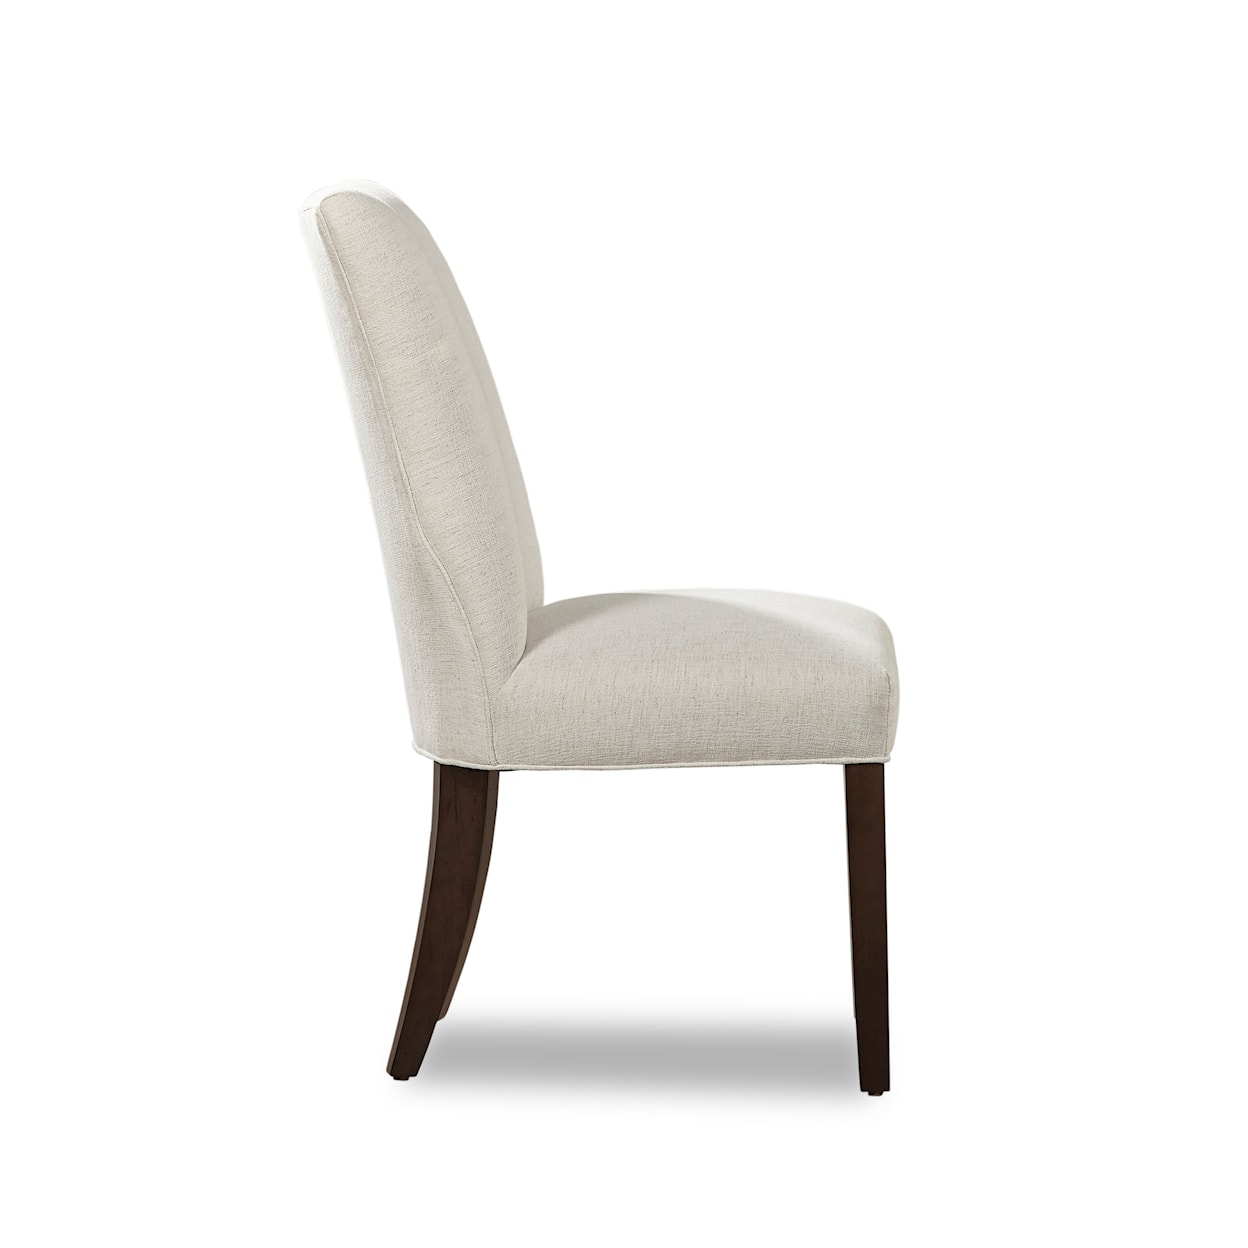 Huntington House 2411 Series Upholstered Dining Chair